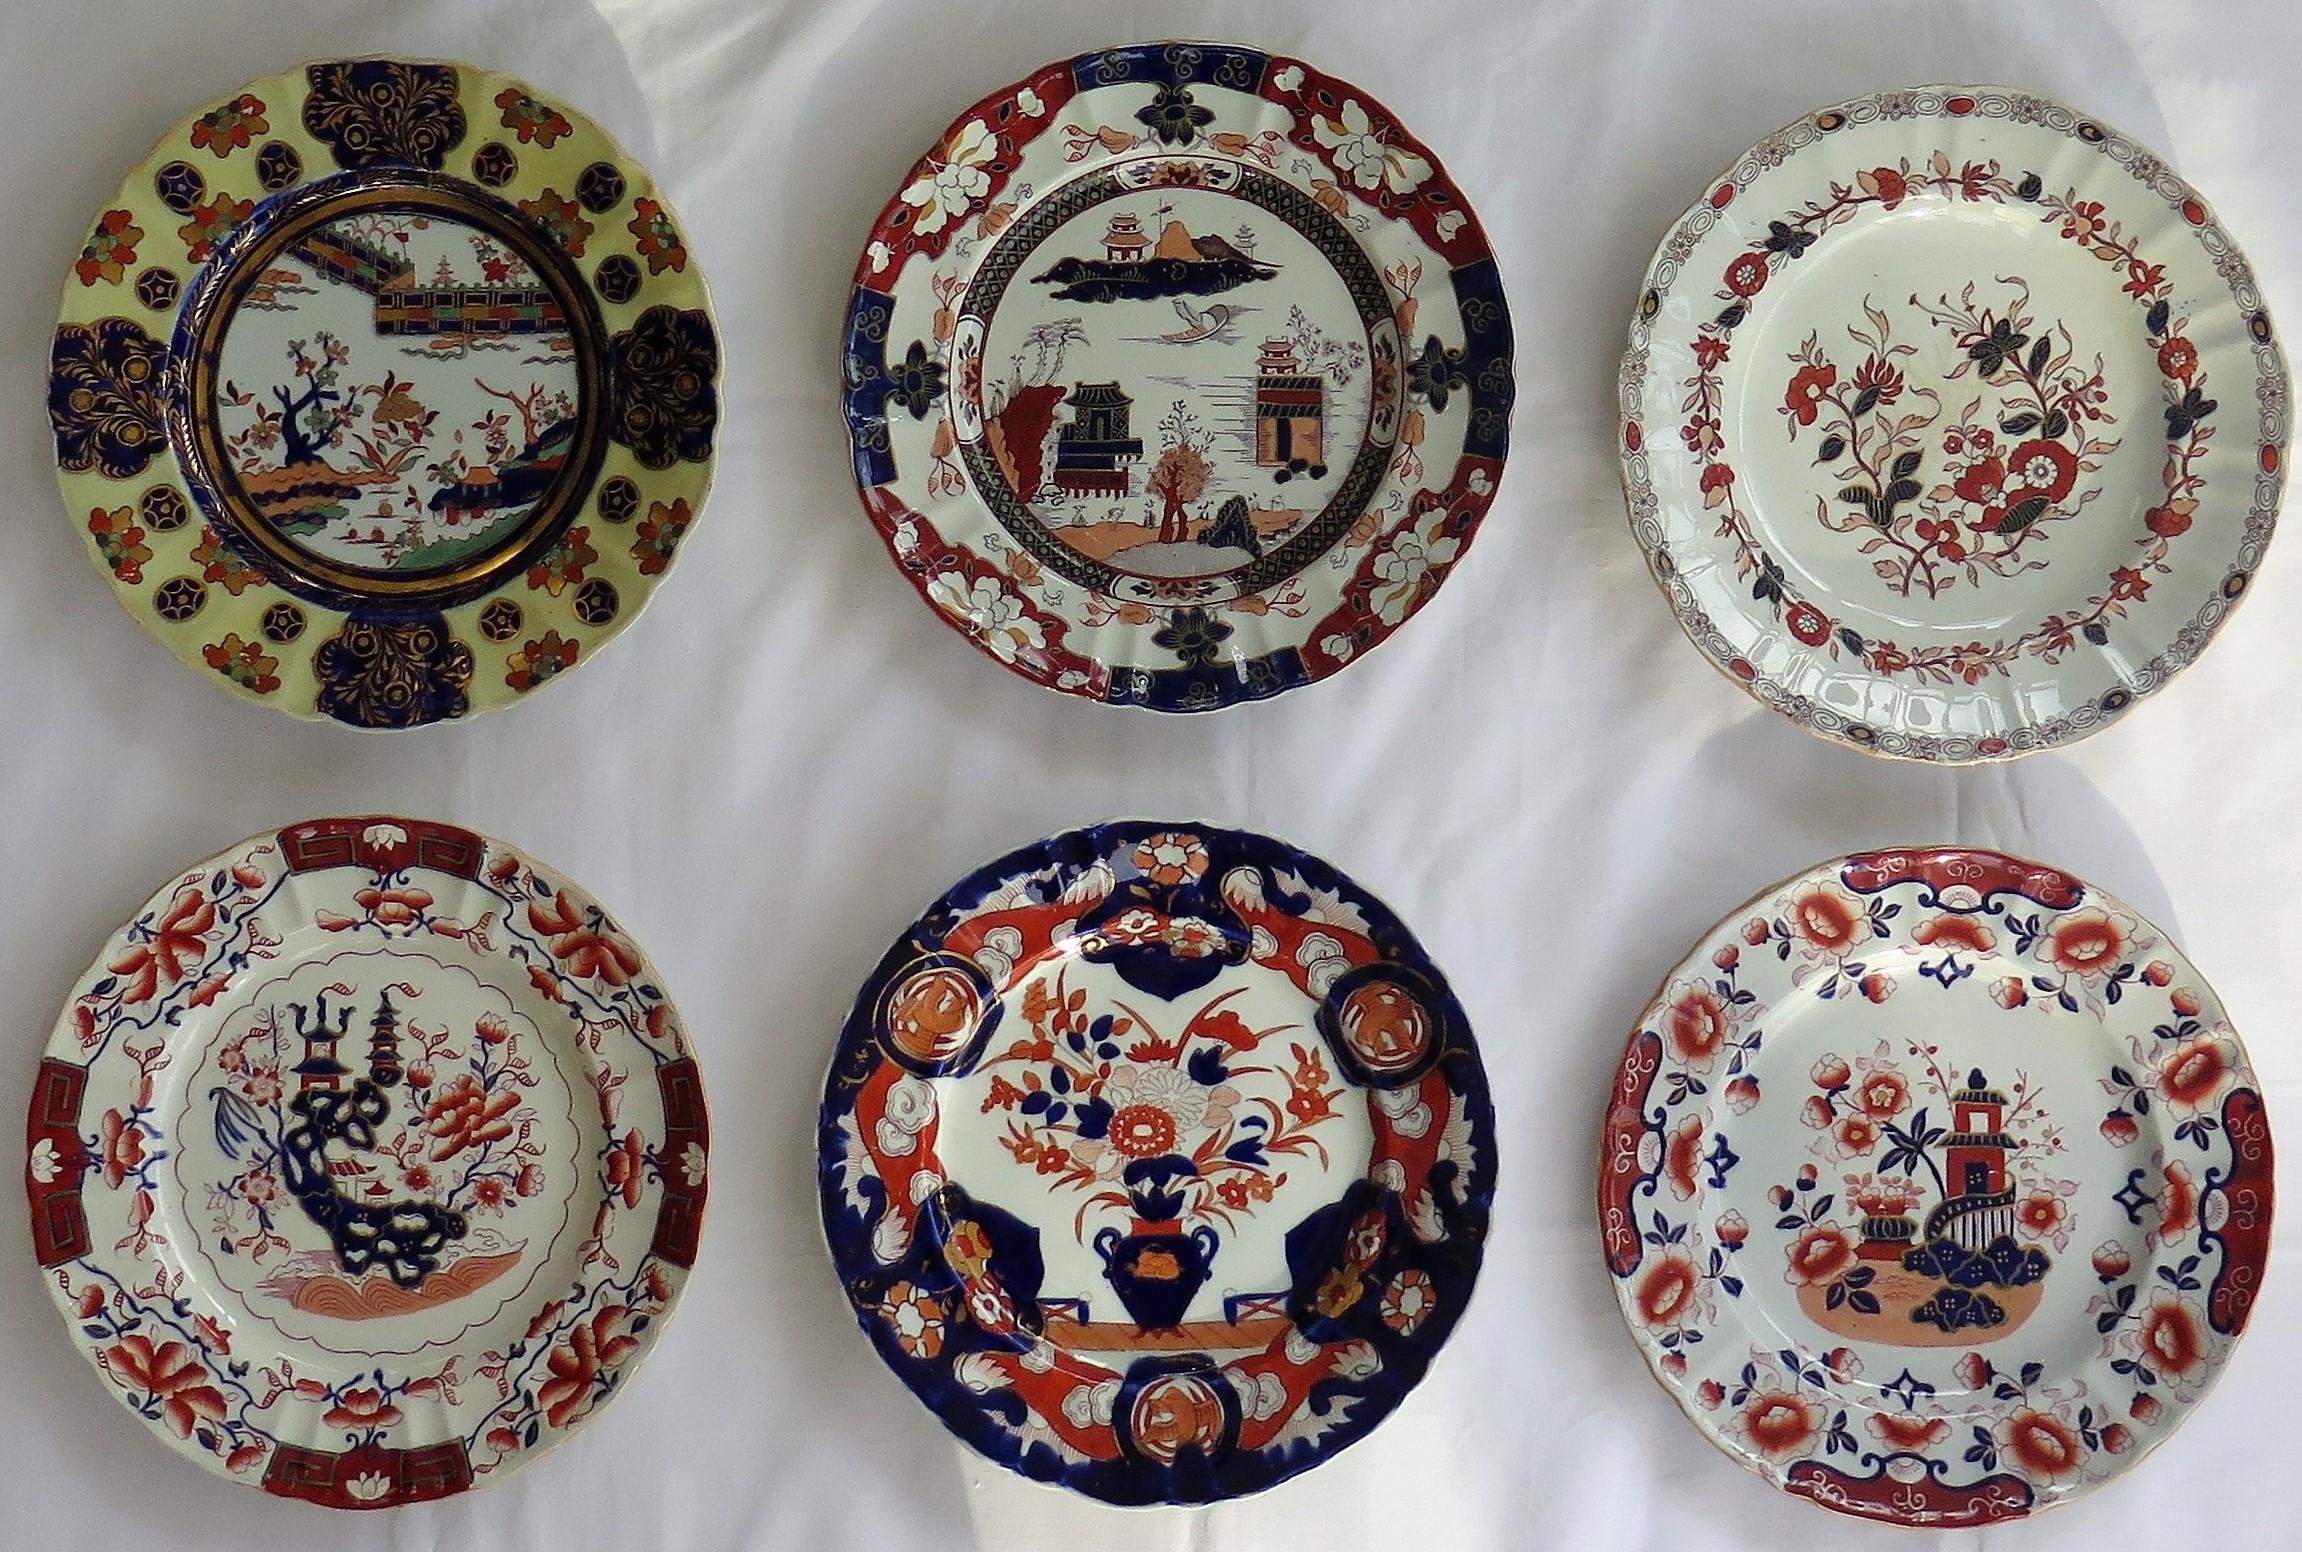 This is a harlequin set of six Mason's Ironstone, large dinner plates, all dating between the early to mid-19th century, between 1825-1865.

All the plates have a very similar shape profile and size with some slight variation in height and